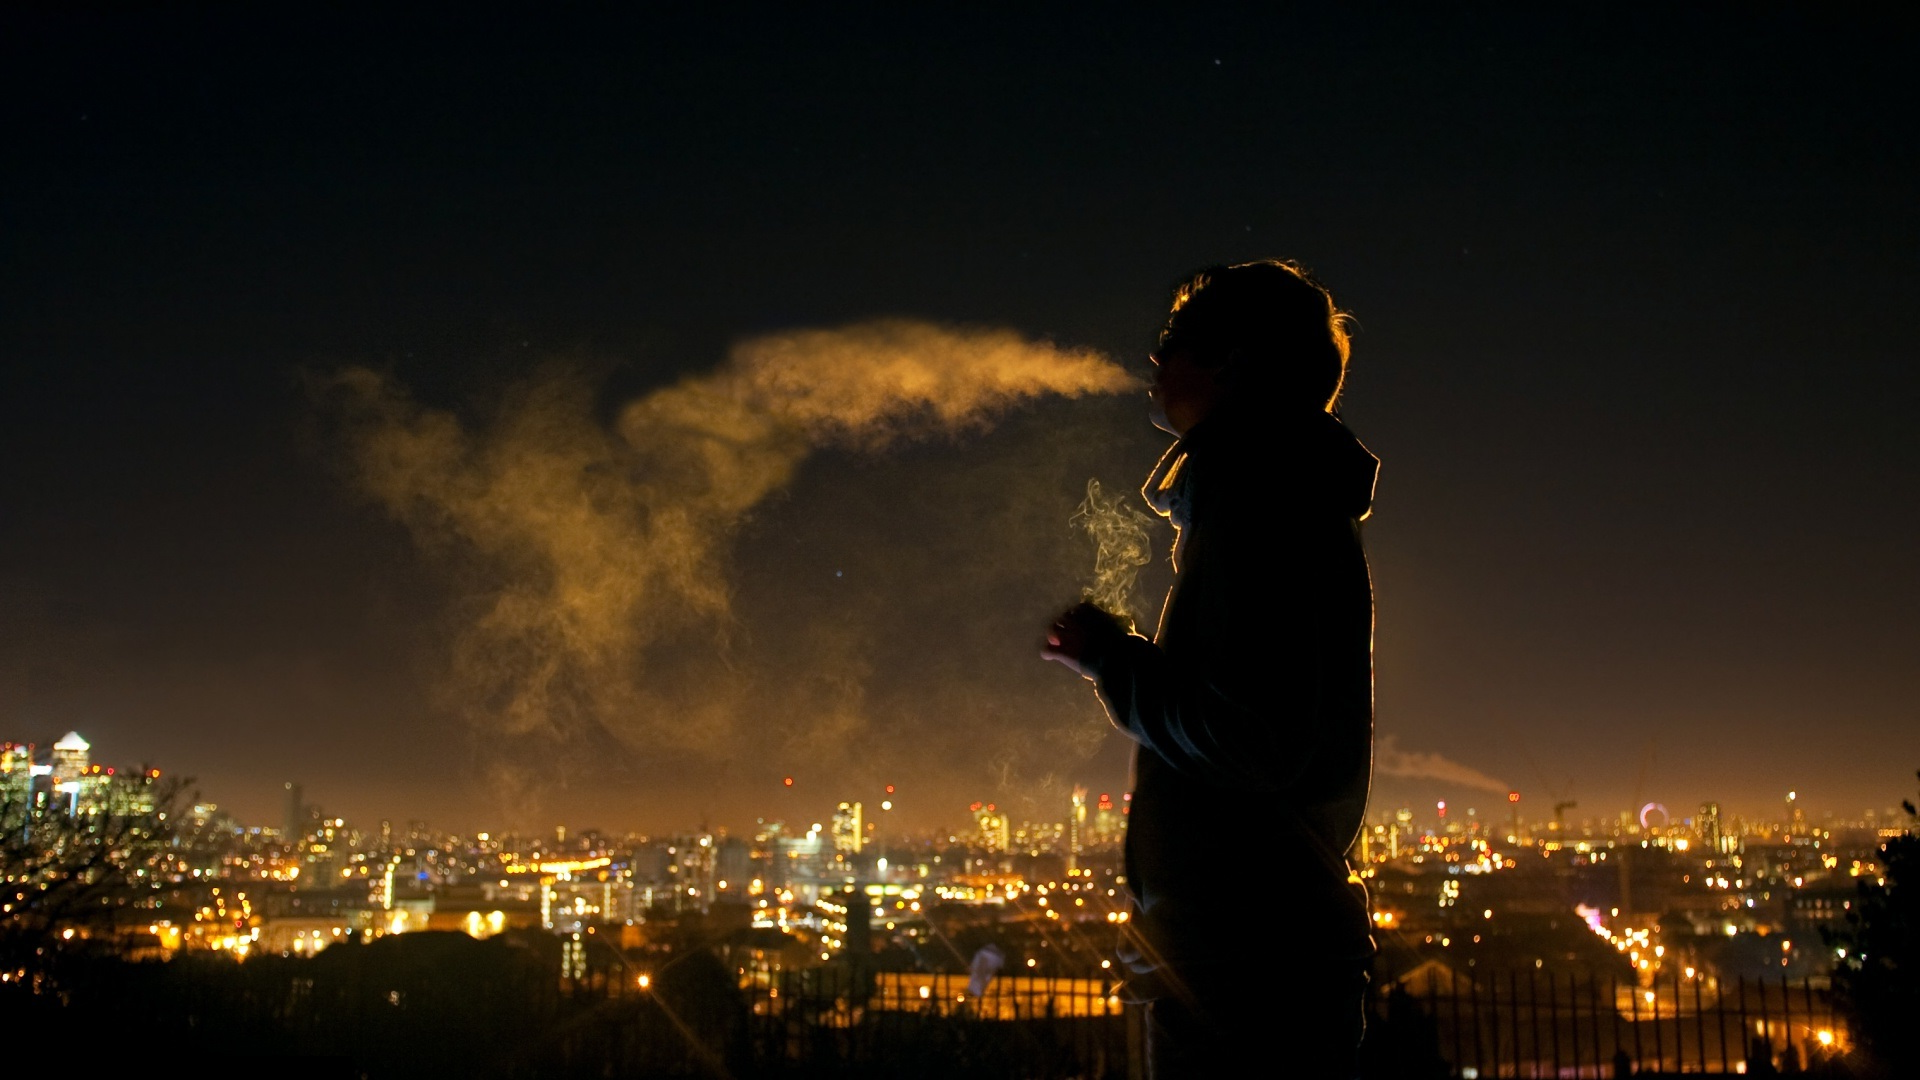 Smoking Hd Wallpapers 1080p - Smoking In The Night , HD Wallpaper & Backgrounds